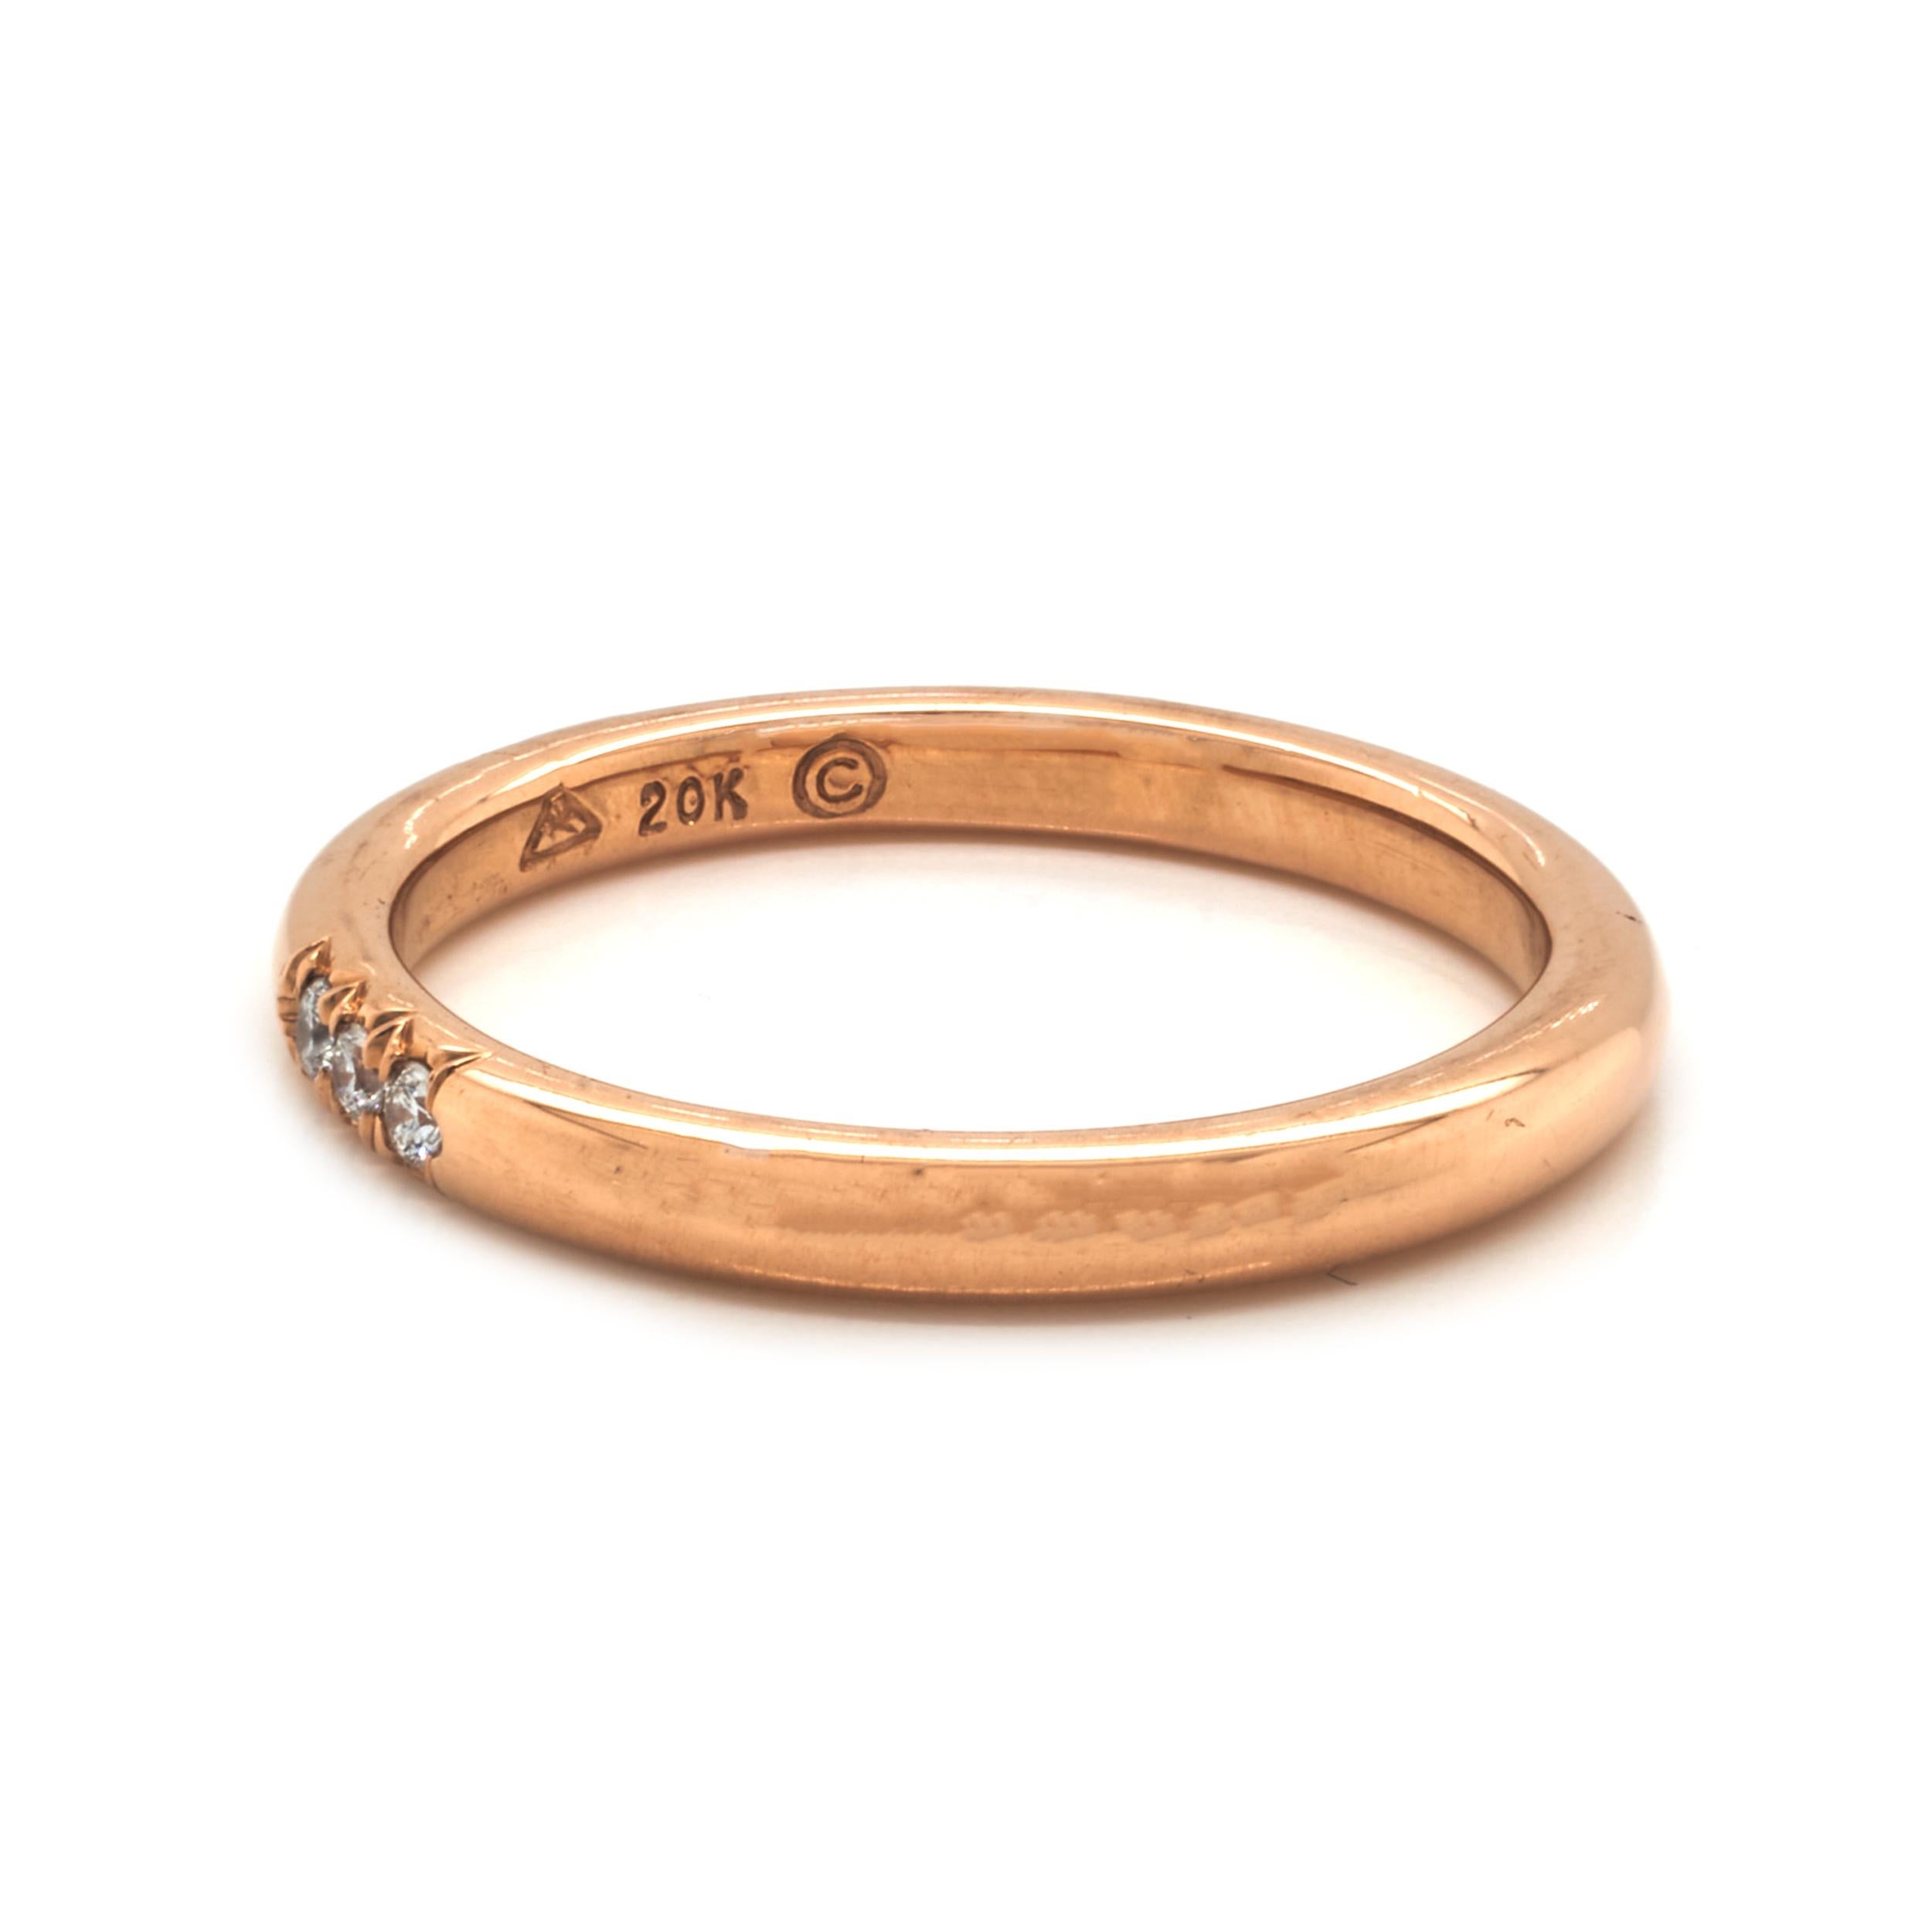 Designer: Custom
Material: 20K rose gold
Diamonds: 3 round cut = .06cttw
Color: G
Clarity: VS1
Size: 5.25
Dimensions: ring measures 2.27mm in width
Weight: 3.25 grams